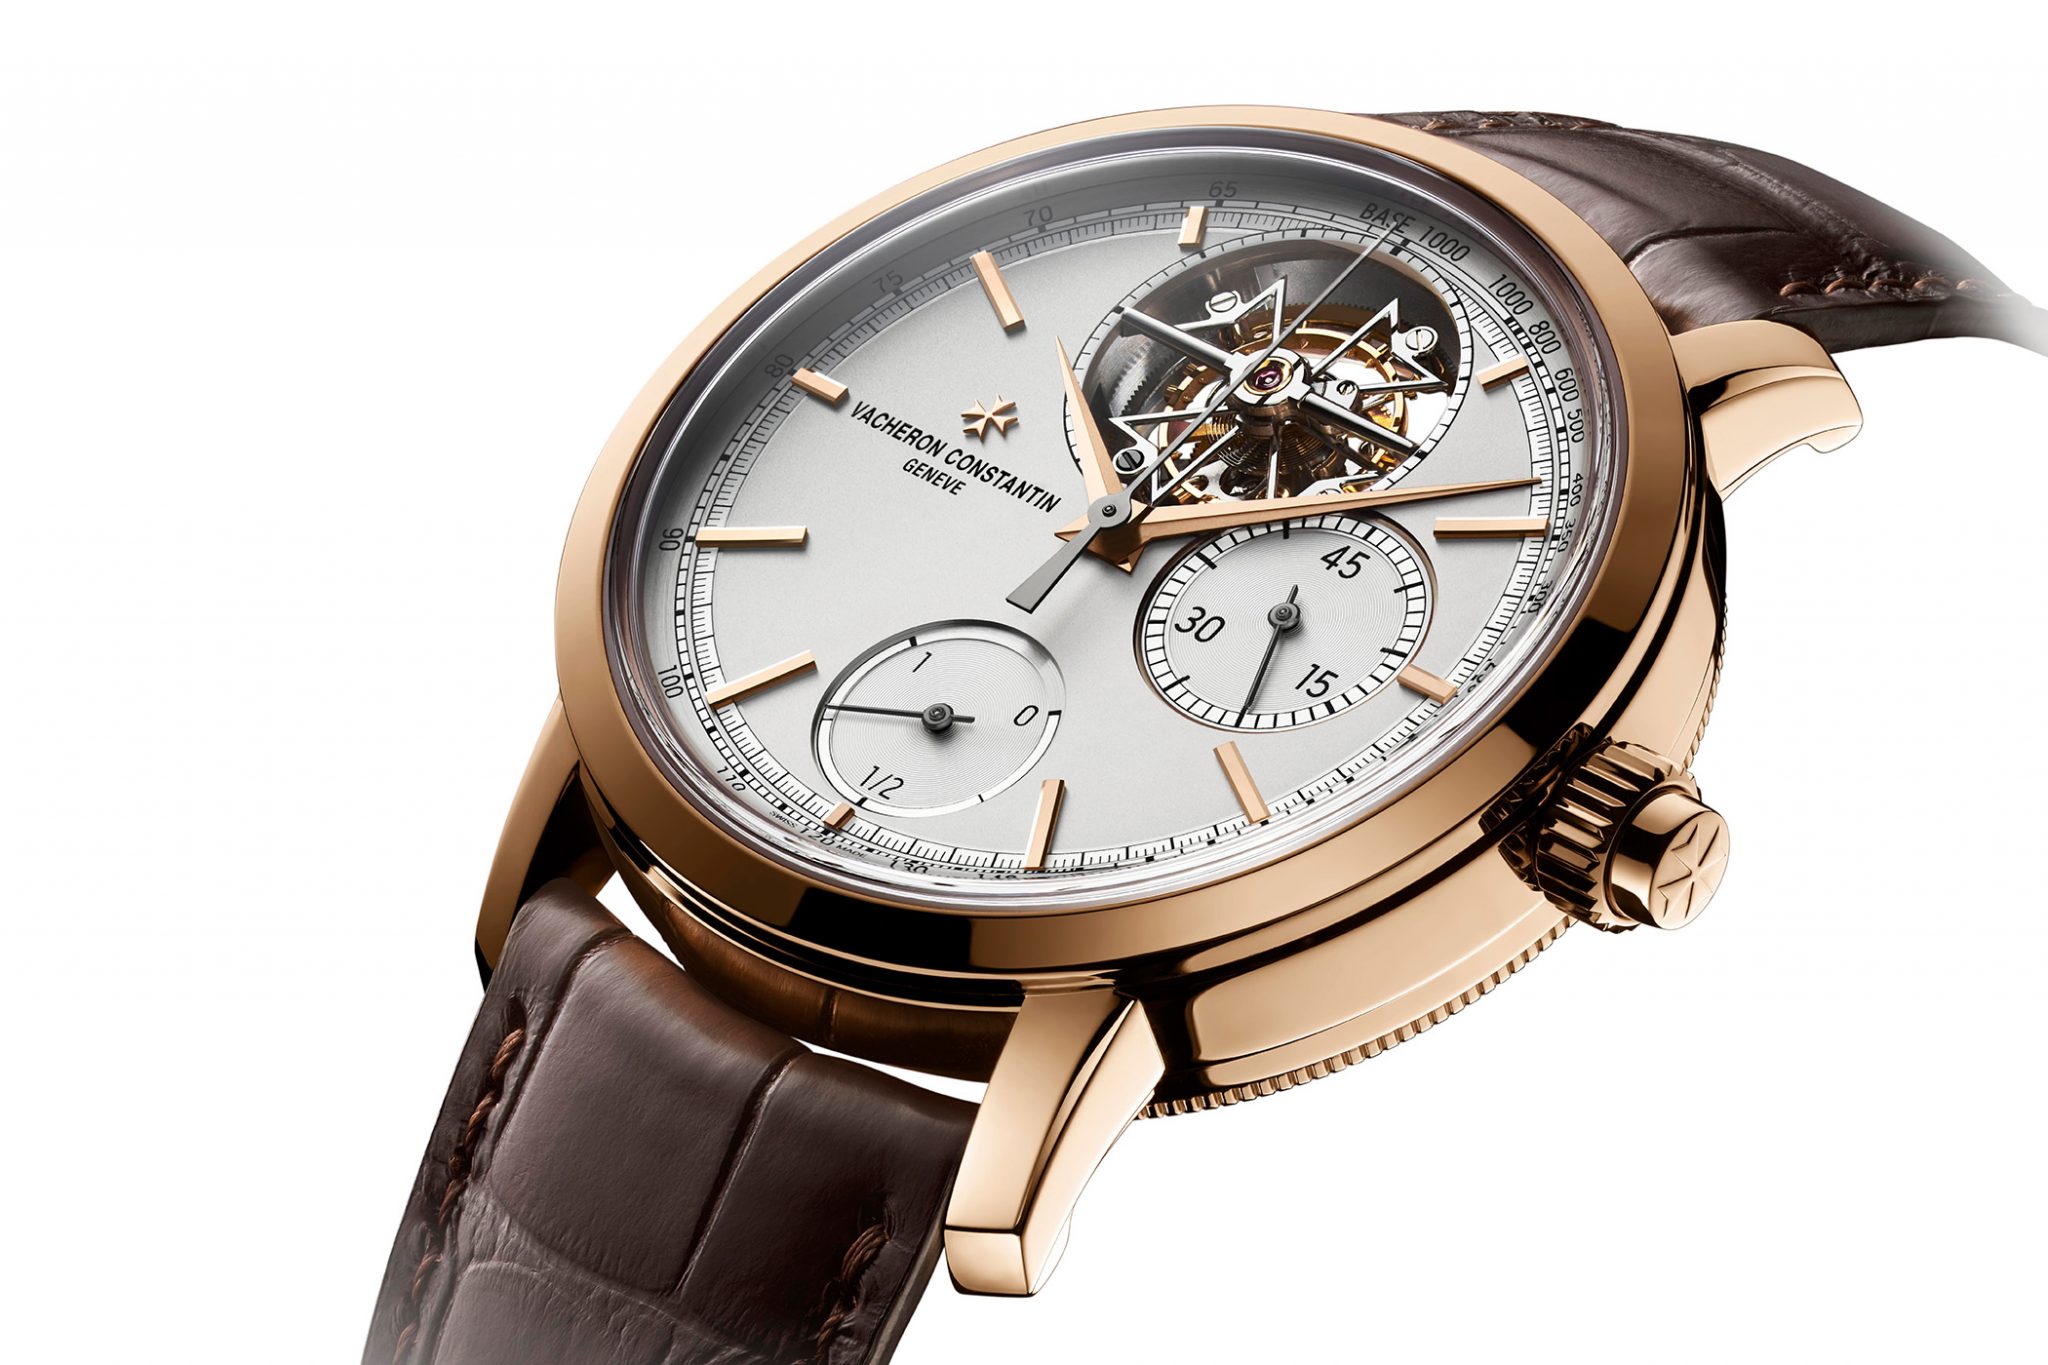 Vacheron Constantin Traditionelle Tourbillon Chronograph Uhr 5100S 000R B623 Watches and Wonders 2020 novelty front dial sideview crown